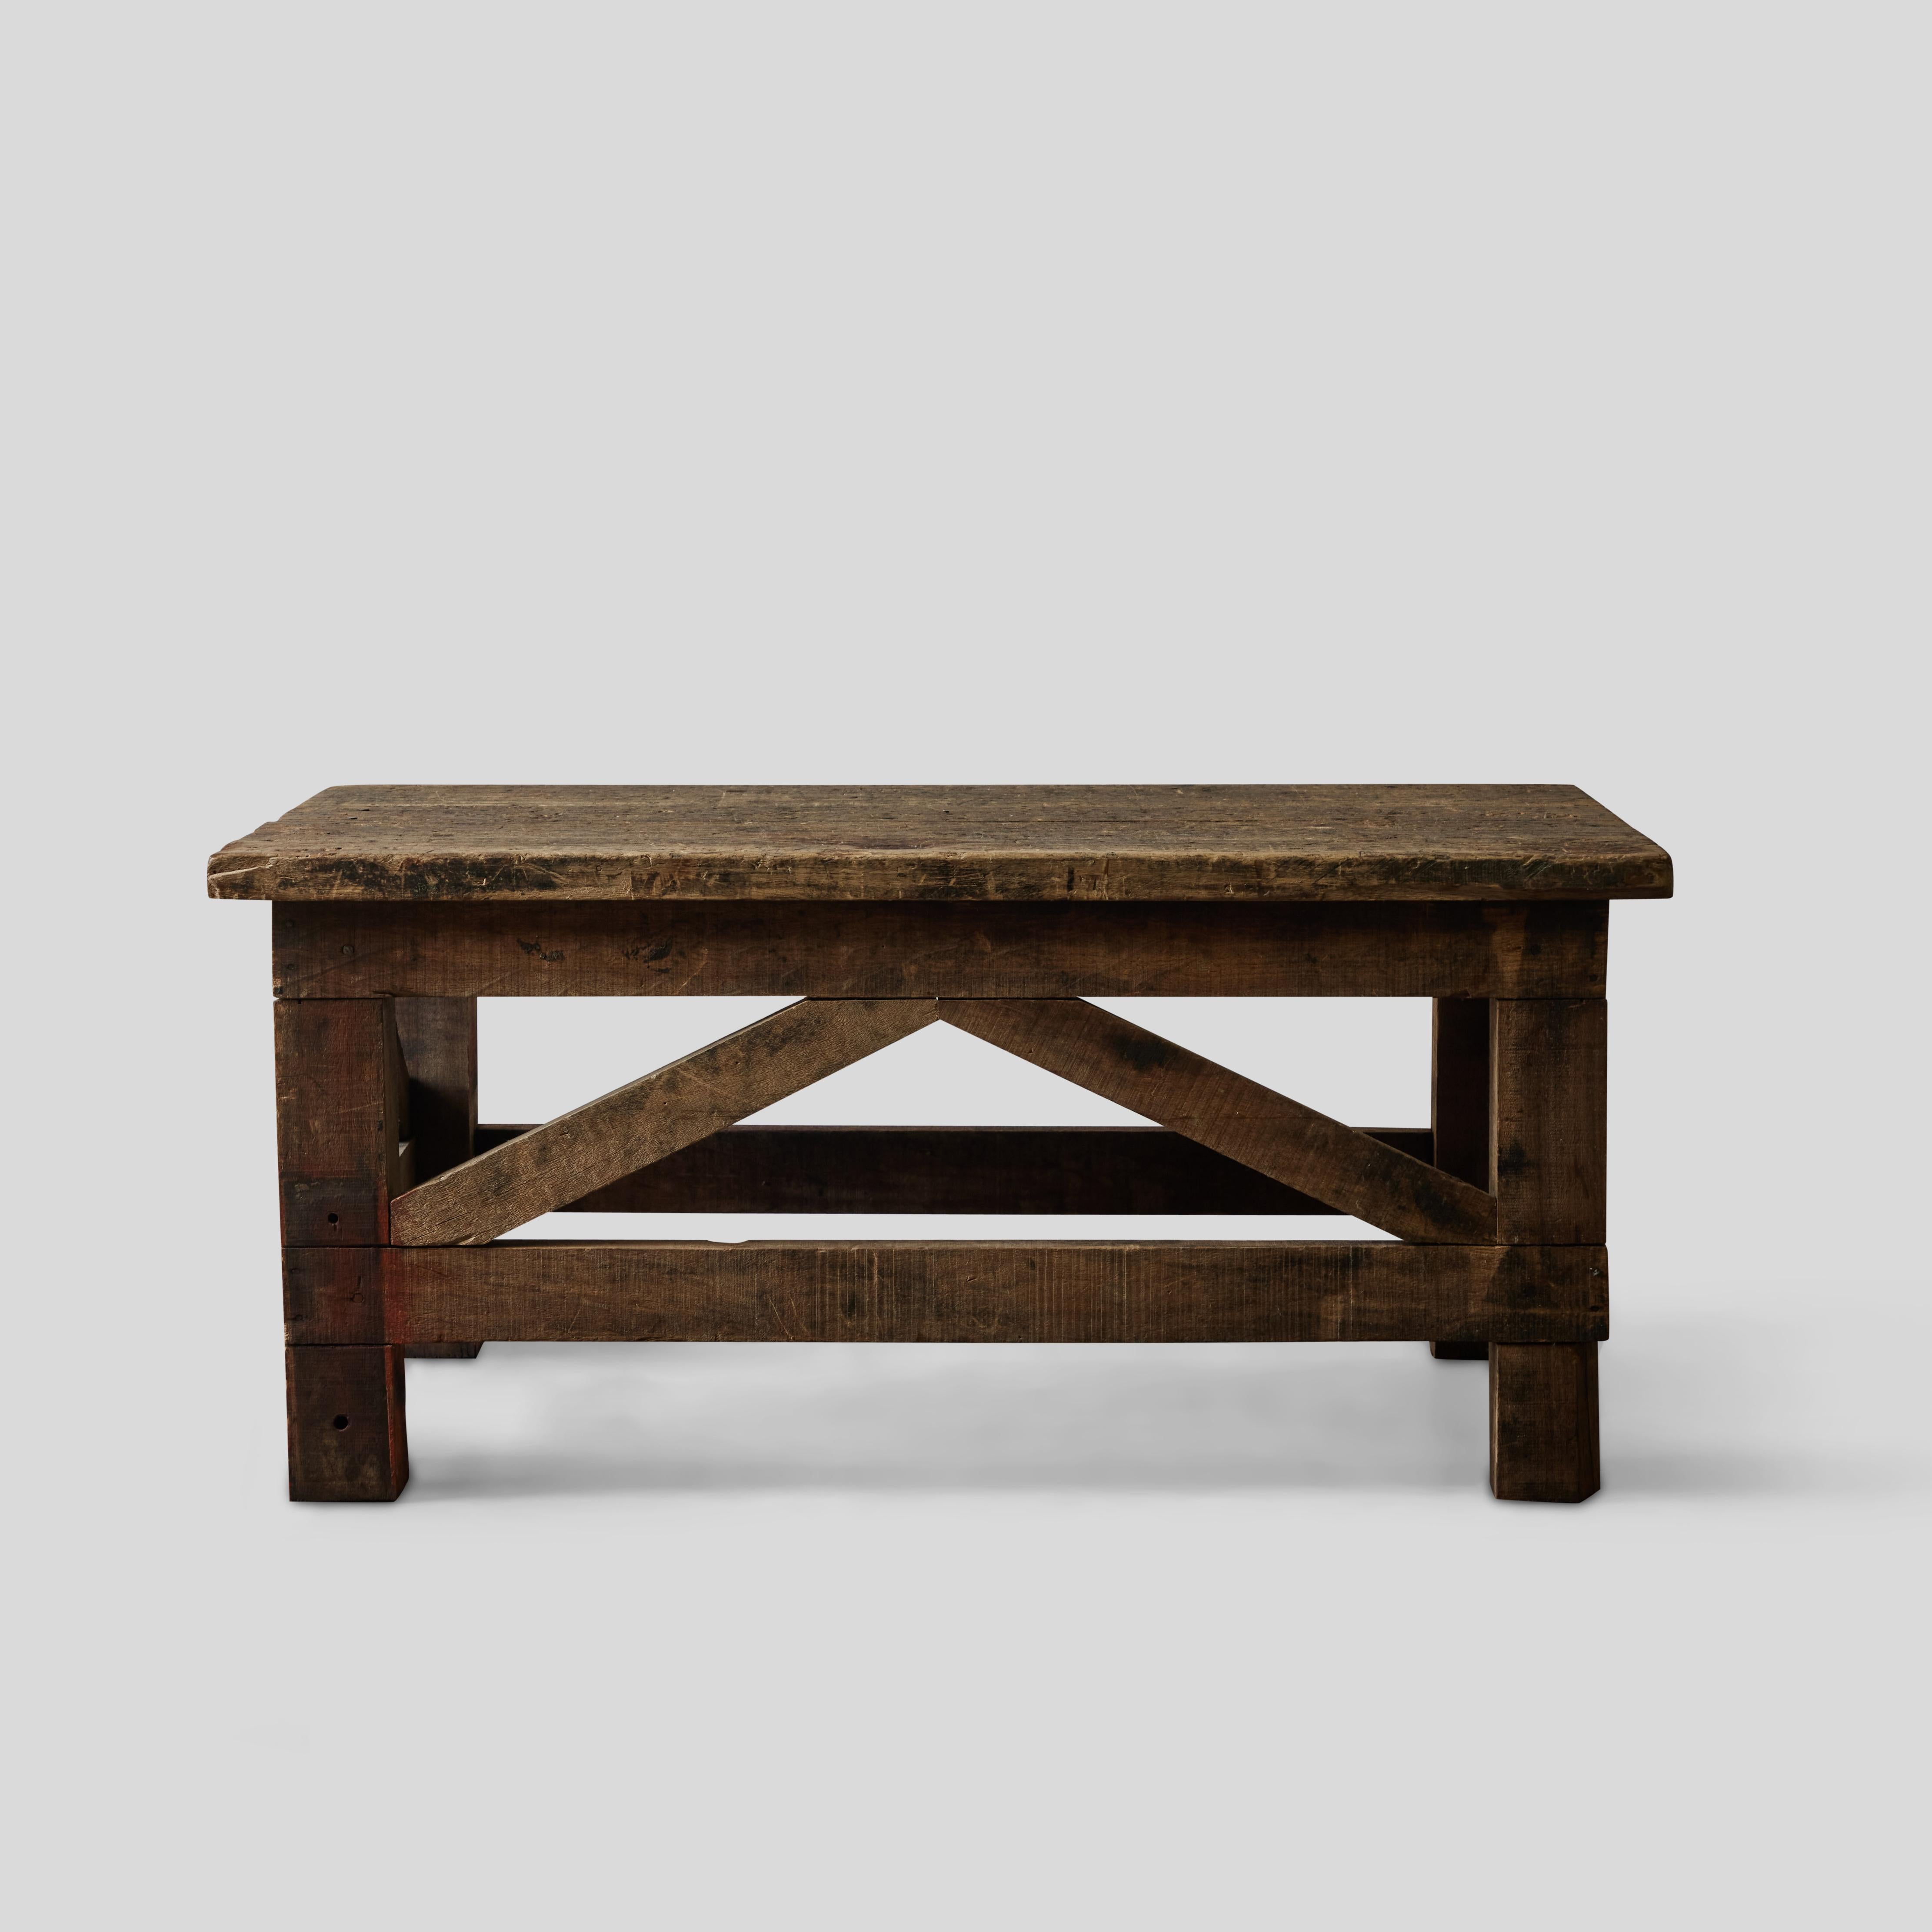 French 1860s rustic wooden coffee table. Extremely versatile, this 19th-century piece brings an air of bucolic, time-worn simplicity to any space. A light wash of red paint on the length of the table's vertical siding gives it an arty, cheerful